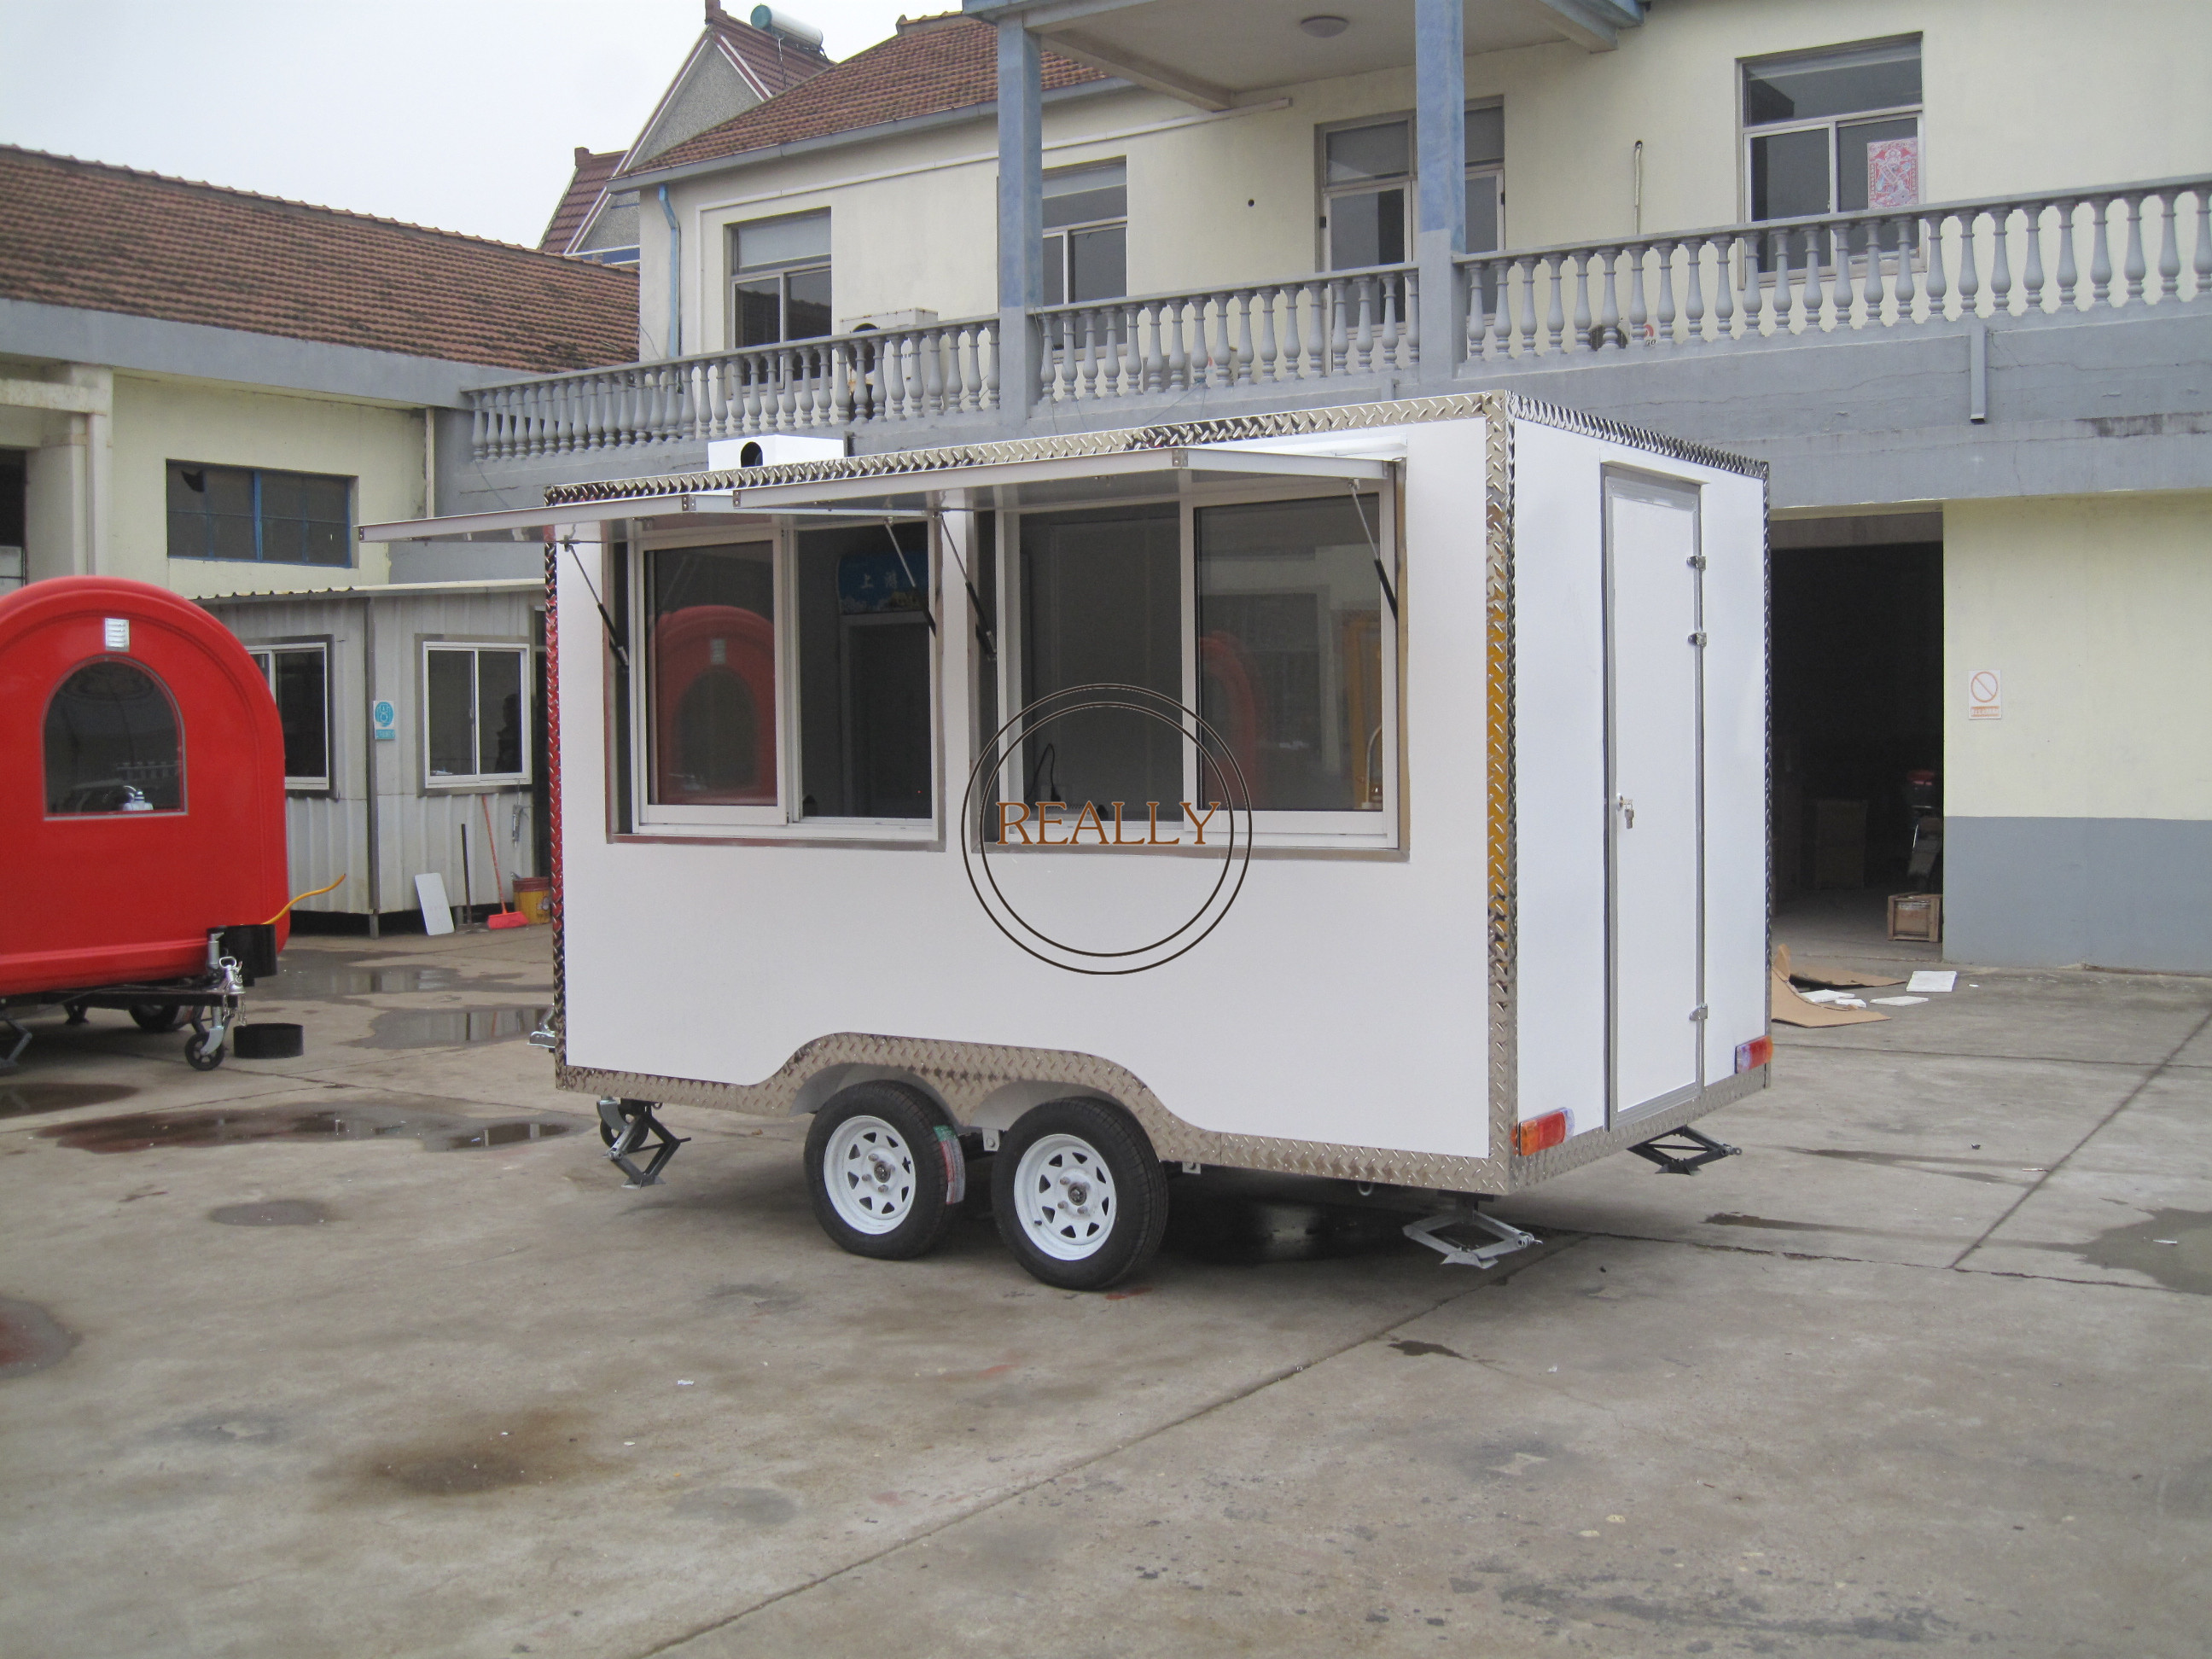 KN-FS400 Customized Black Electric Pizza Coffee Waffle Mobile Restaurant Food Truck Cart with Factory Price